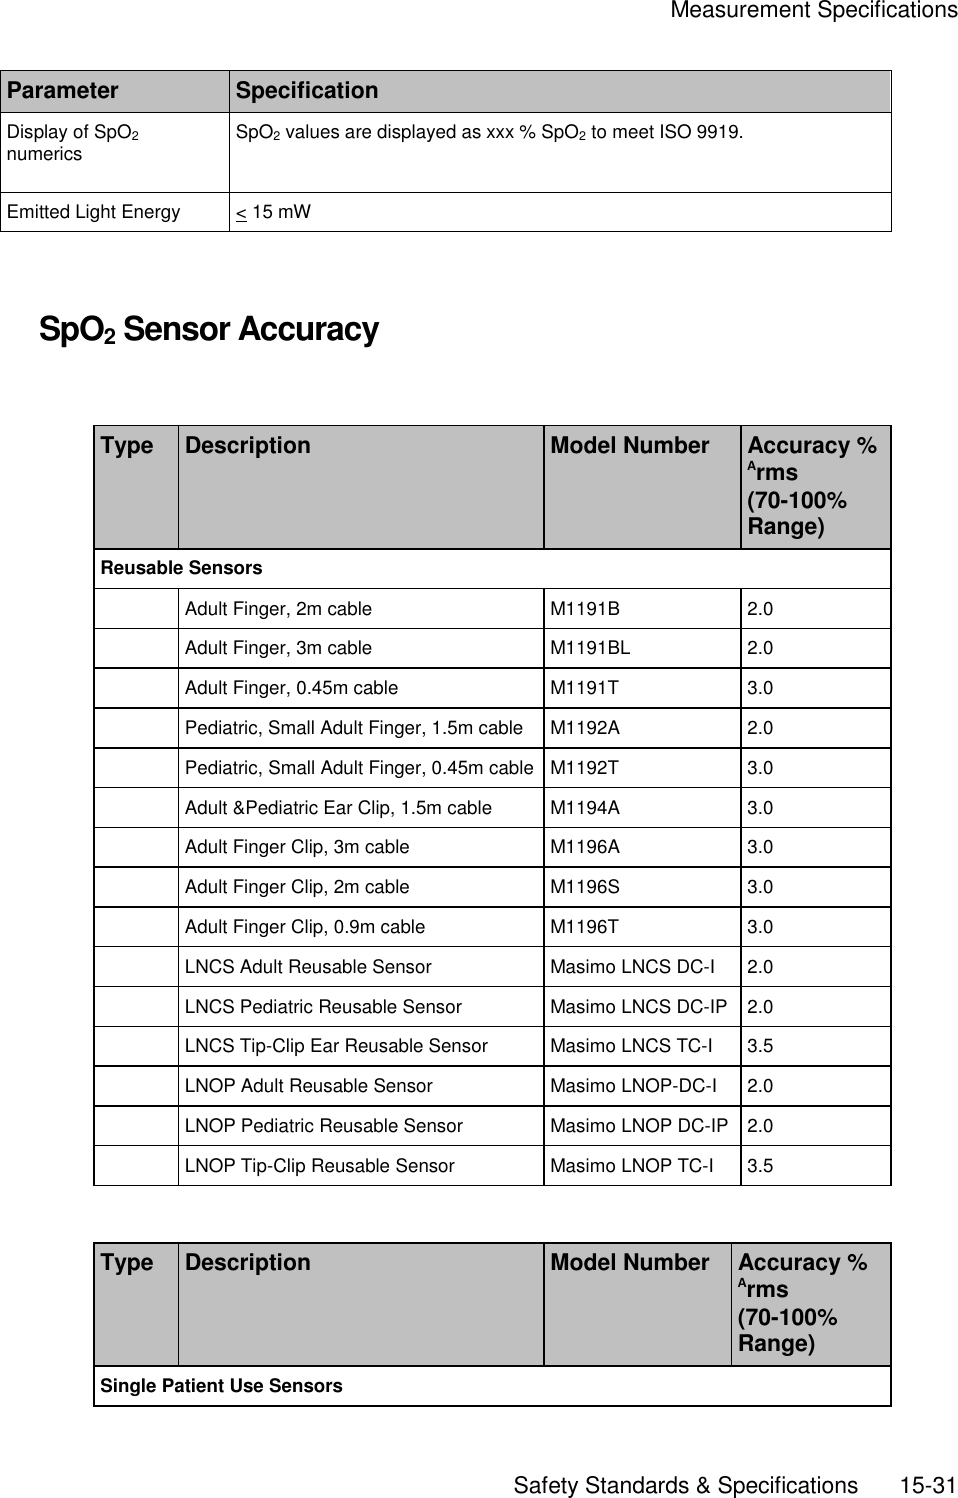     Measurement Specifications       Safety Standards &amp; Specifications        15-31 Parameter Specification Display of SpO2 numerics SpO2 values are displayed as xxx % SpO2 to meet ISO 9919. Emitted Light Energy &lt; 15 mW   SpO2 Sensor Accuracy  Type Description Model Number Accuracy % Arms (70-100% Range) Reusable Sensors  Adult Finger, 2m cable M1191B 2.0  Adult Finger, 3m cable M1191BL 2.0  Adult Finger, 0.45m cable M1191T 3.0  Pediatric, Small Adult Finger, 1.5m cable M1192A 2.0  Pediatric, Small Adult Finger, 0.45m cable M1192T 3.0  Adult &amp;Pediatric Ear Clip, 1.5m cable M1194A 3.0  Adult Finger Clip, 3m cable M1196A 3.0  Adult Finger Clip, 2m cable M1196S 3.0  Adult Finger Clip, 0.9m cable M1196T 3.0  LNCS Adult Reusable Sensor Masimo LNCS DC-I 2.0  LNCS Pediatric Reusable Sensor Masimo LNCS DC-IP 2.0  LNCS Tip-Clip Ear Reusable Sensor Masimo LNCS TC-I 3.5  LNOP Adult Reusable Sensor Masimo LNOP-DC-I 2.0  LNOP Pediatric Reusable Sensor Masimo LNOP DC-IP 2.0  LNOP Tip-Clip Reusable Sensor Masimo LNOP TC-I 3.5  Type Description Model Number Accuracy % Arms (70-100% Range) Single Patient Use Sensors 